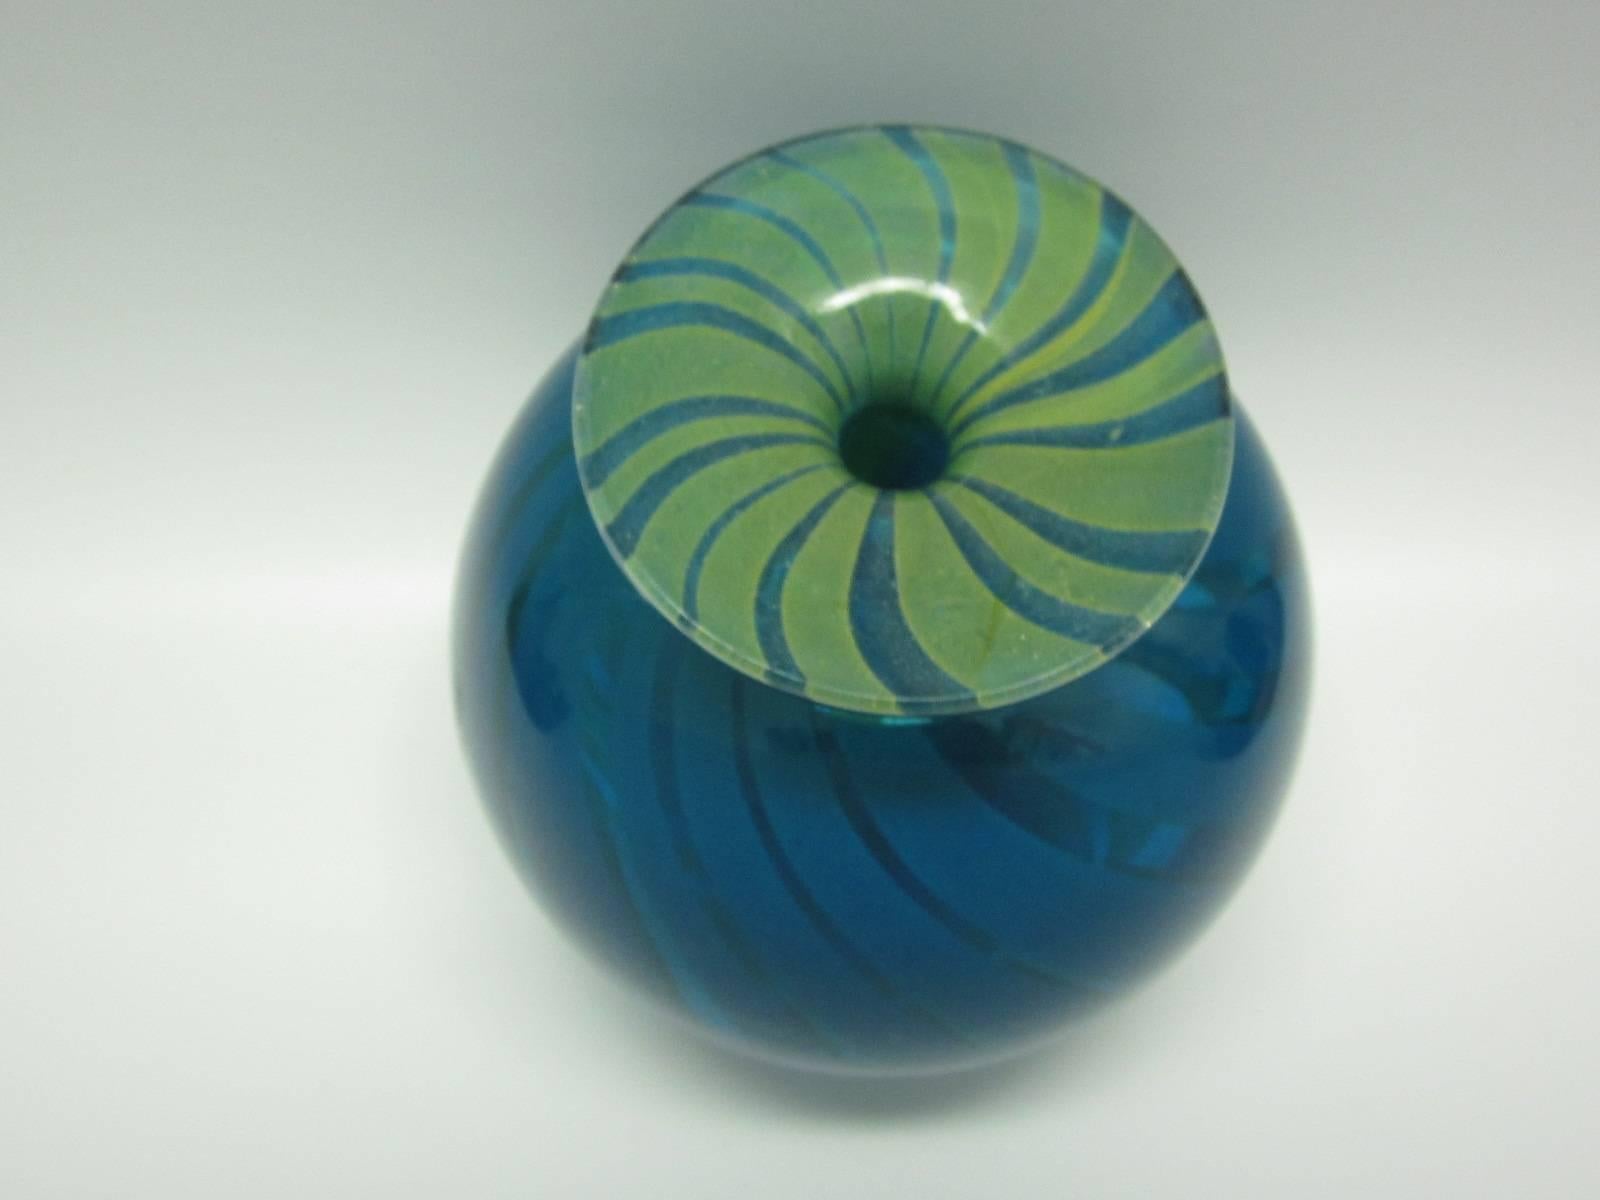 Italian Blown Art Glass Vase in Blue and Green Swirl, Signed 3